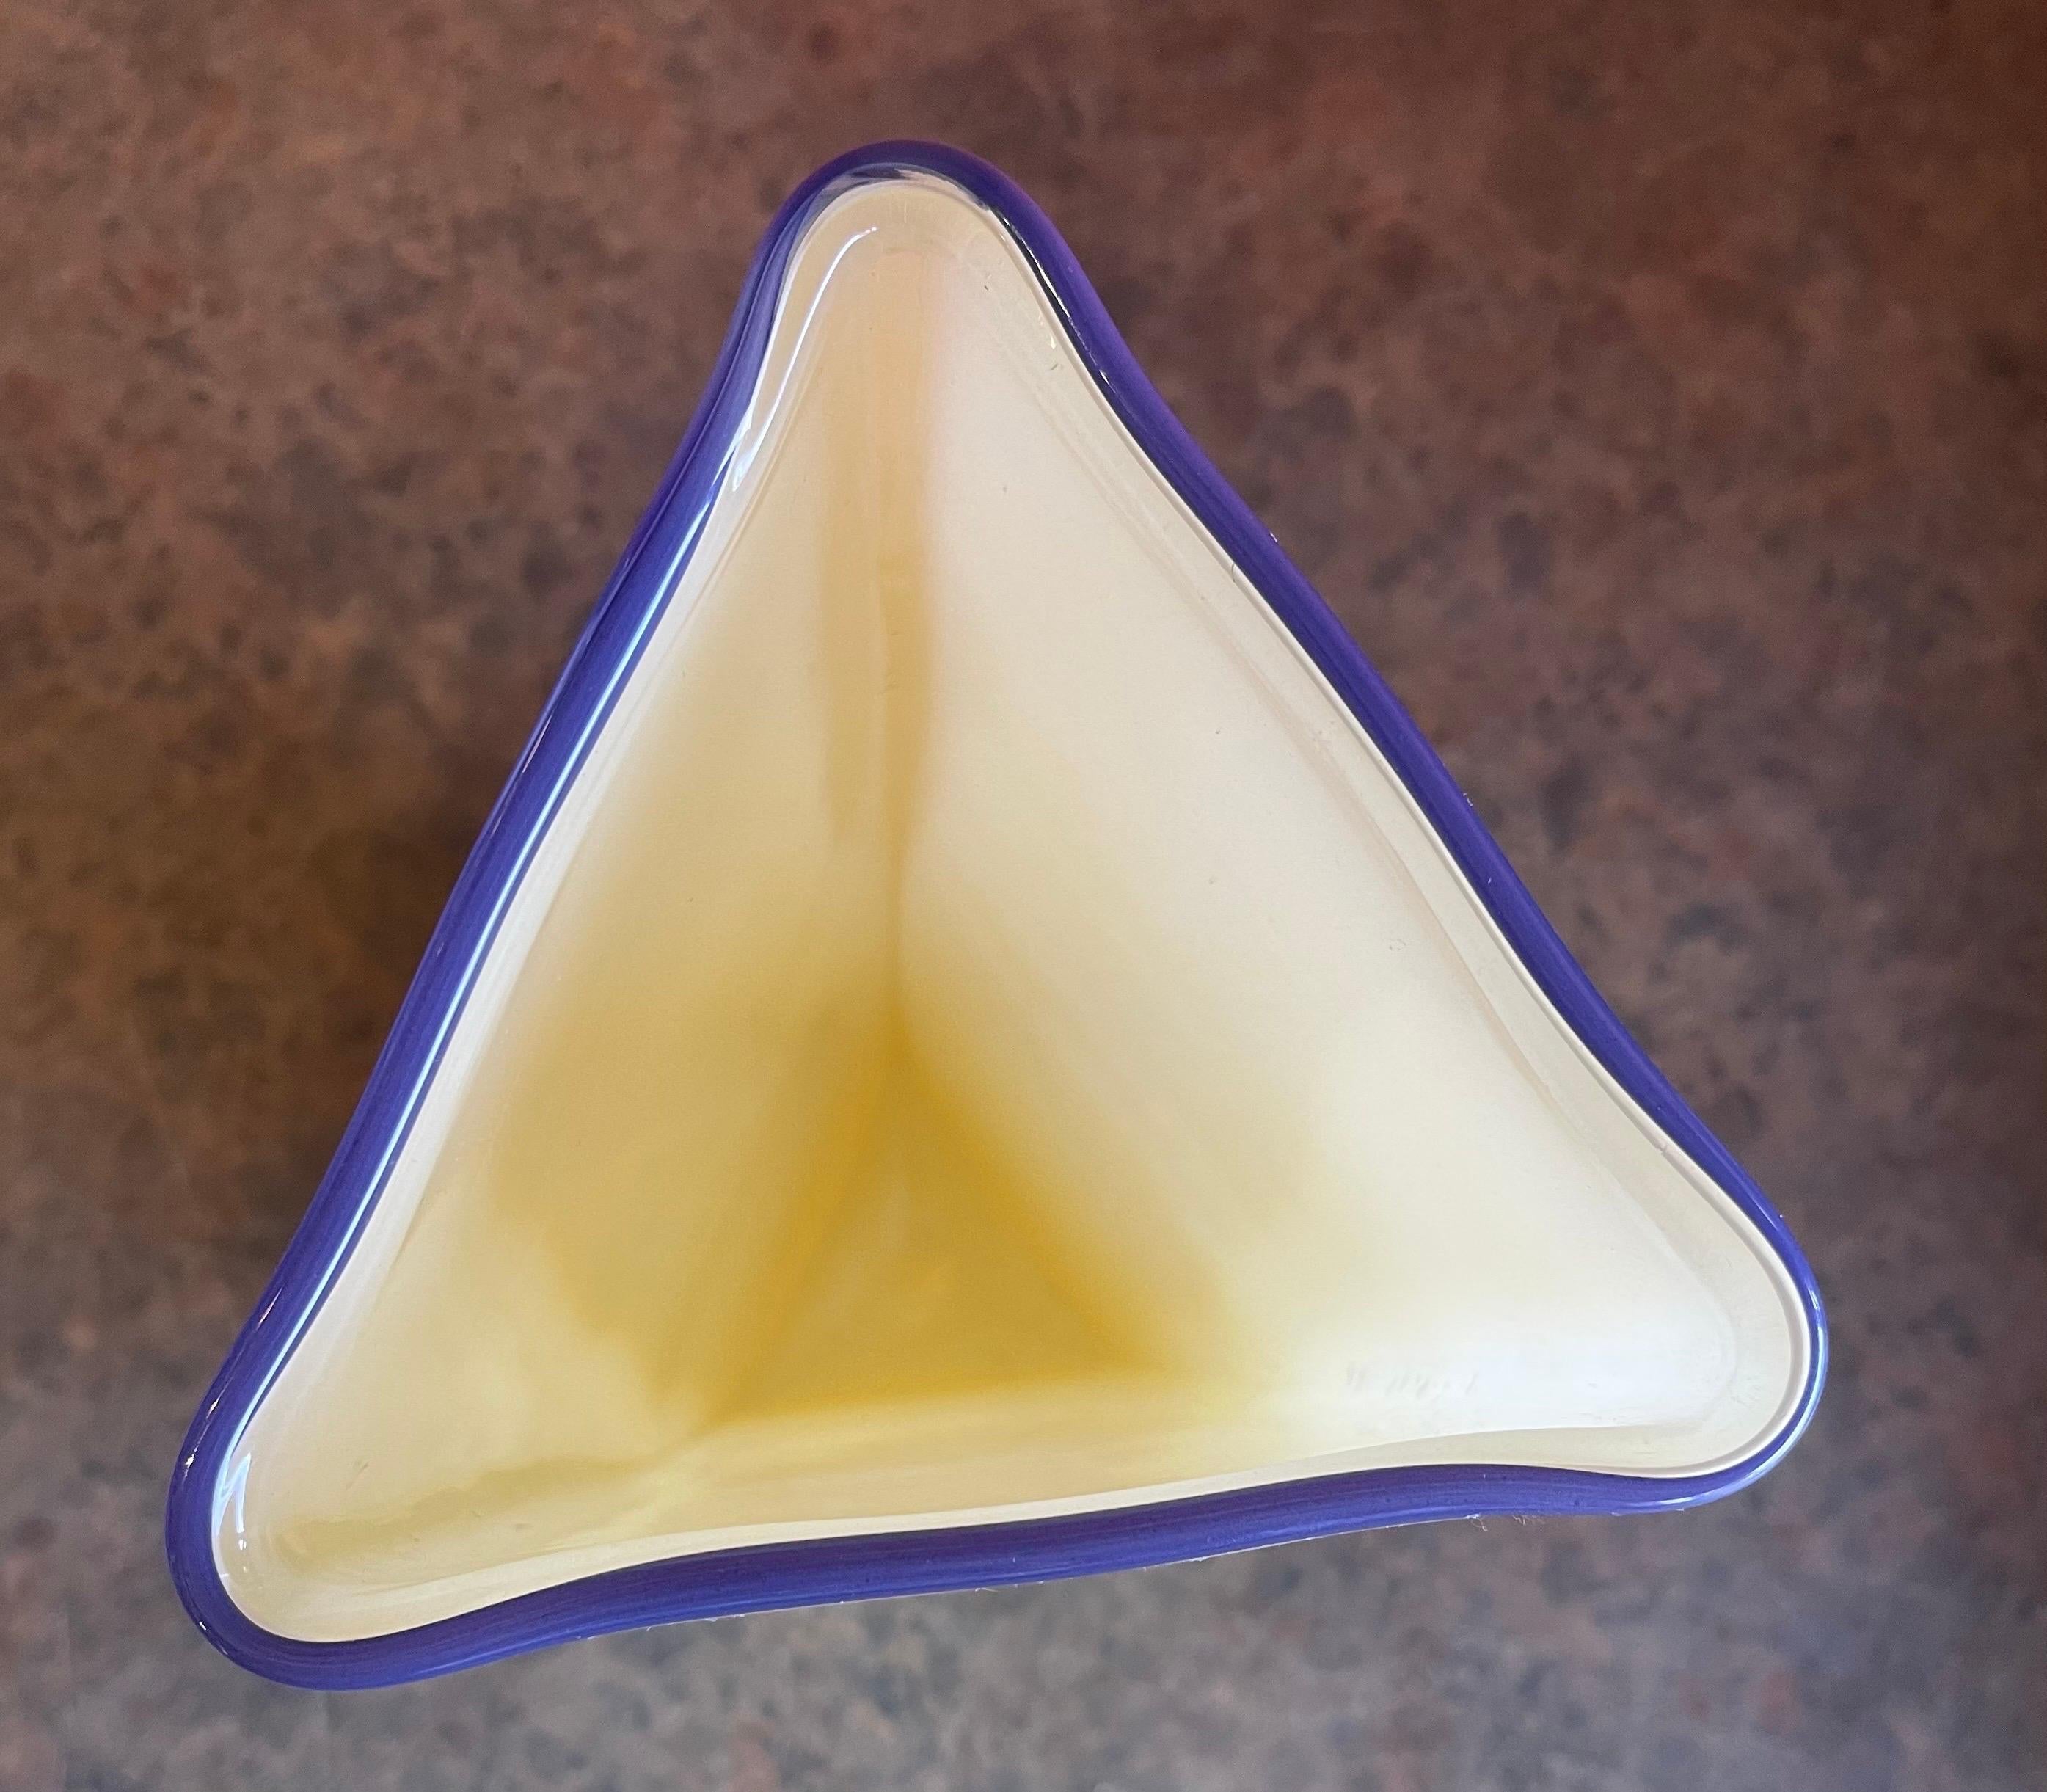 Large Triangle Shaped Art Glass Vase by Murano For Sale 4